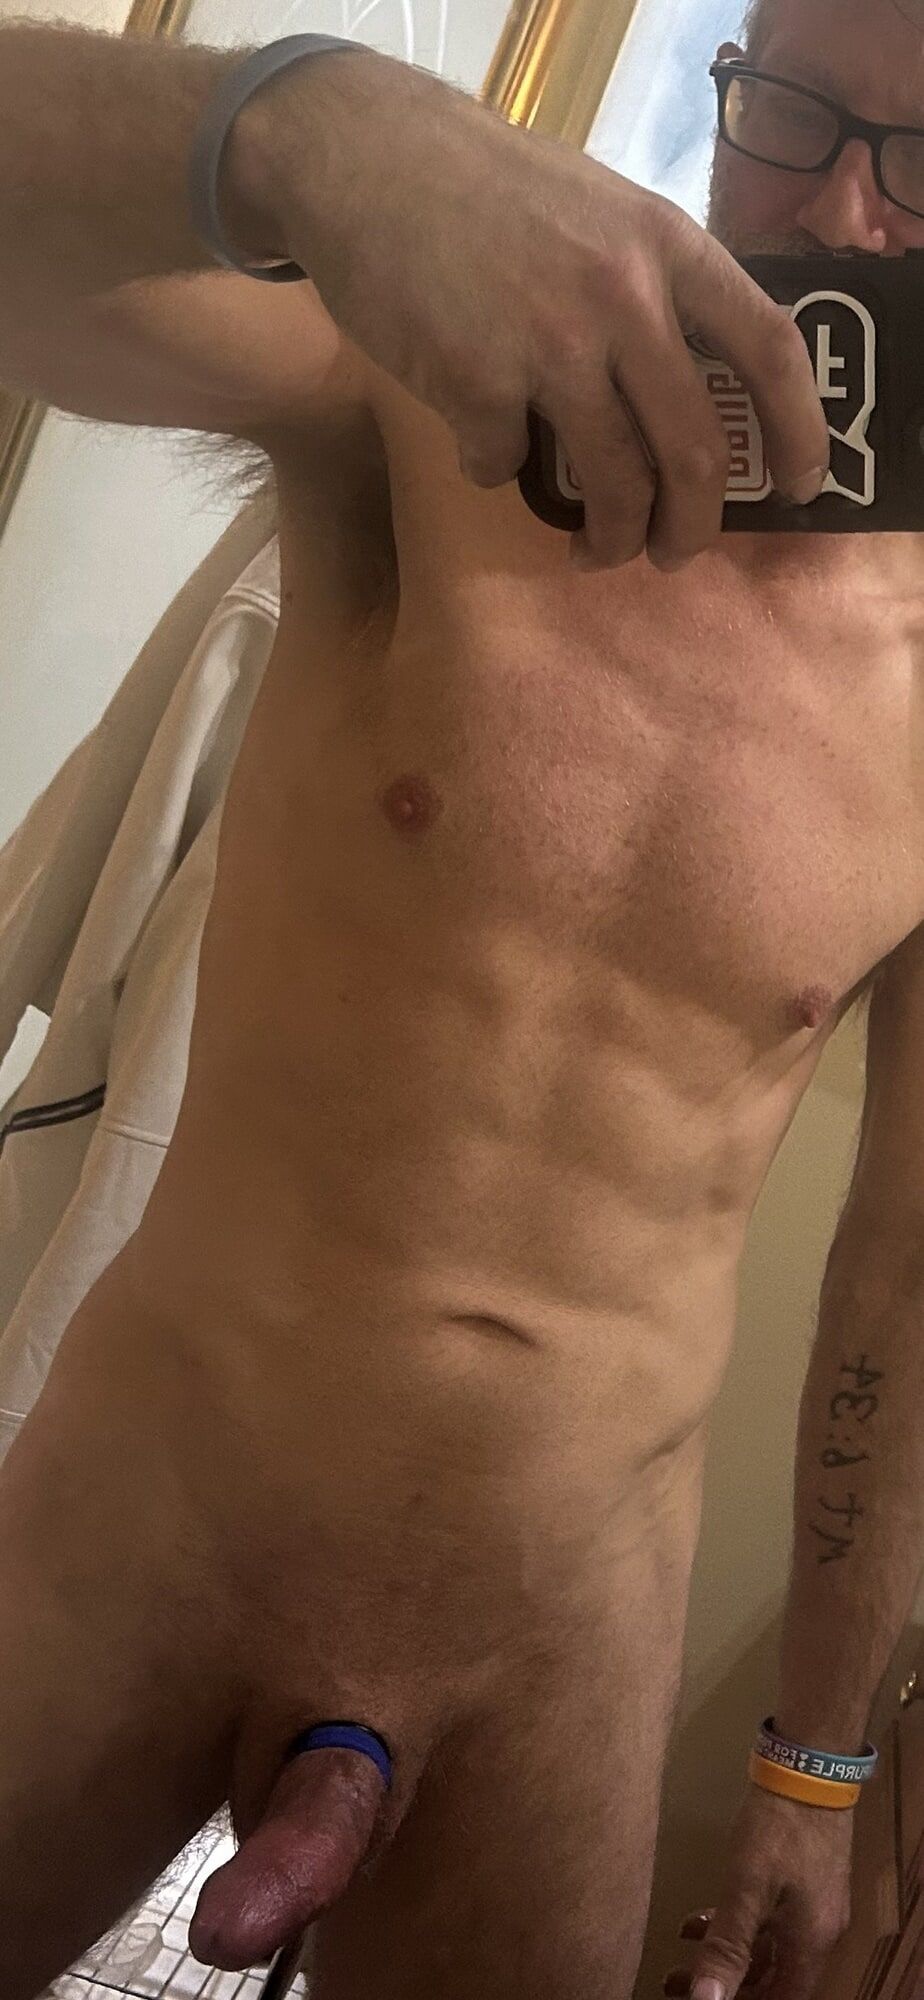 Abs and cock